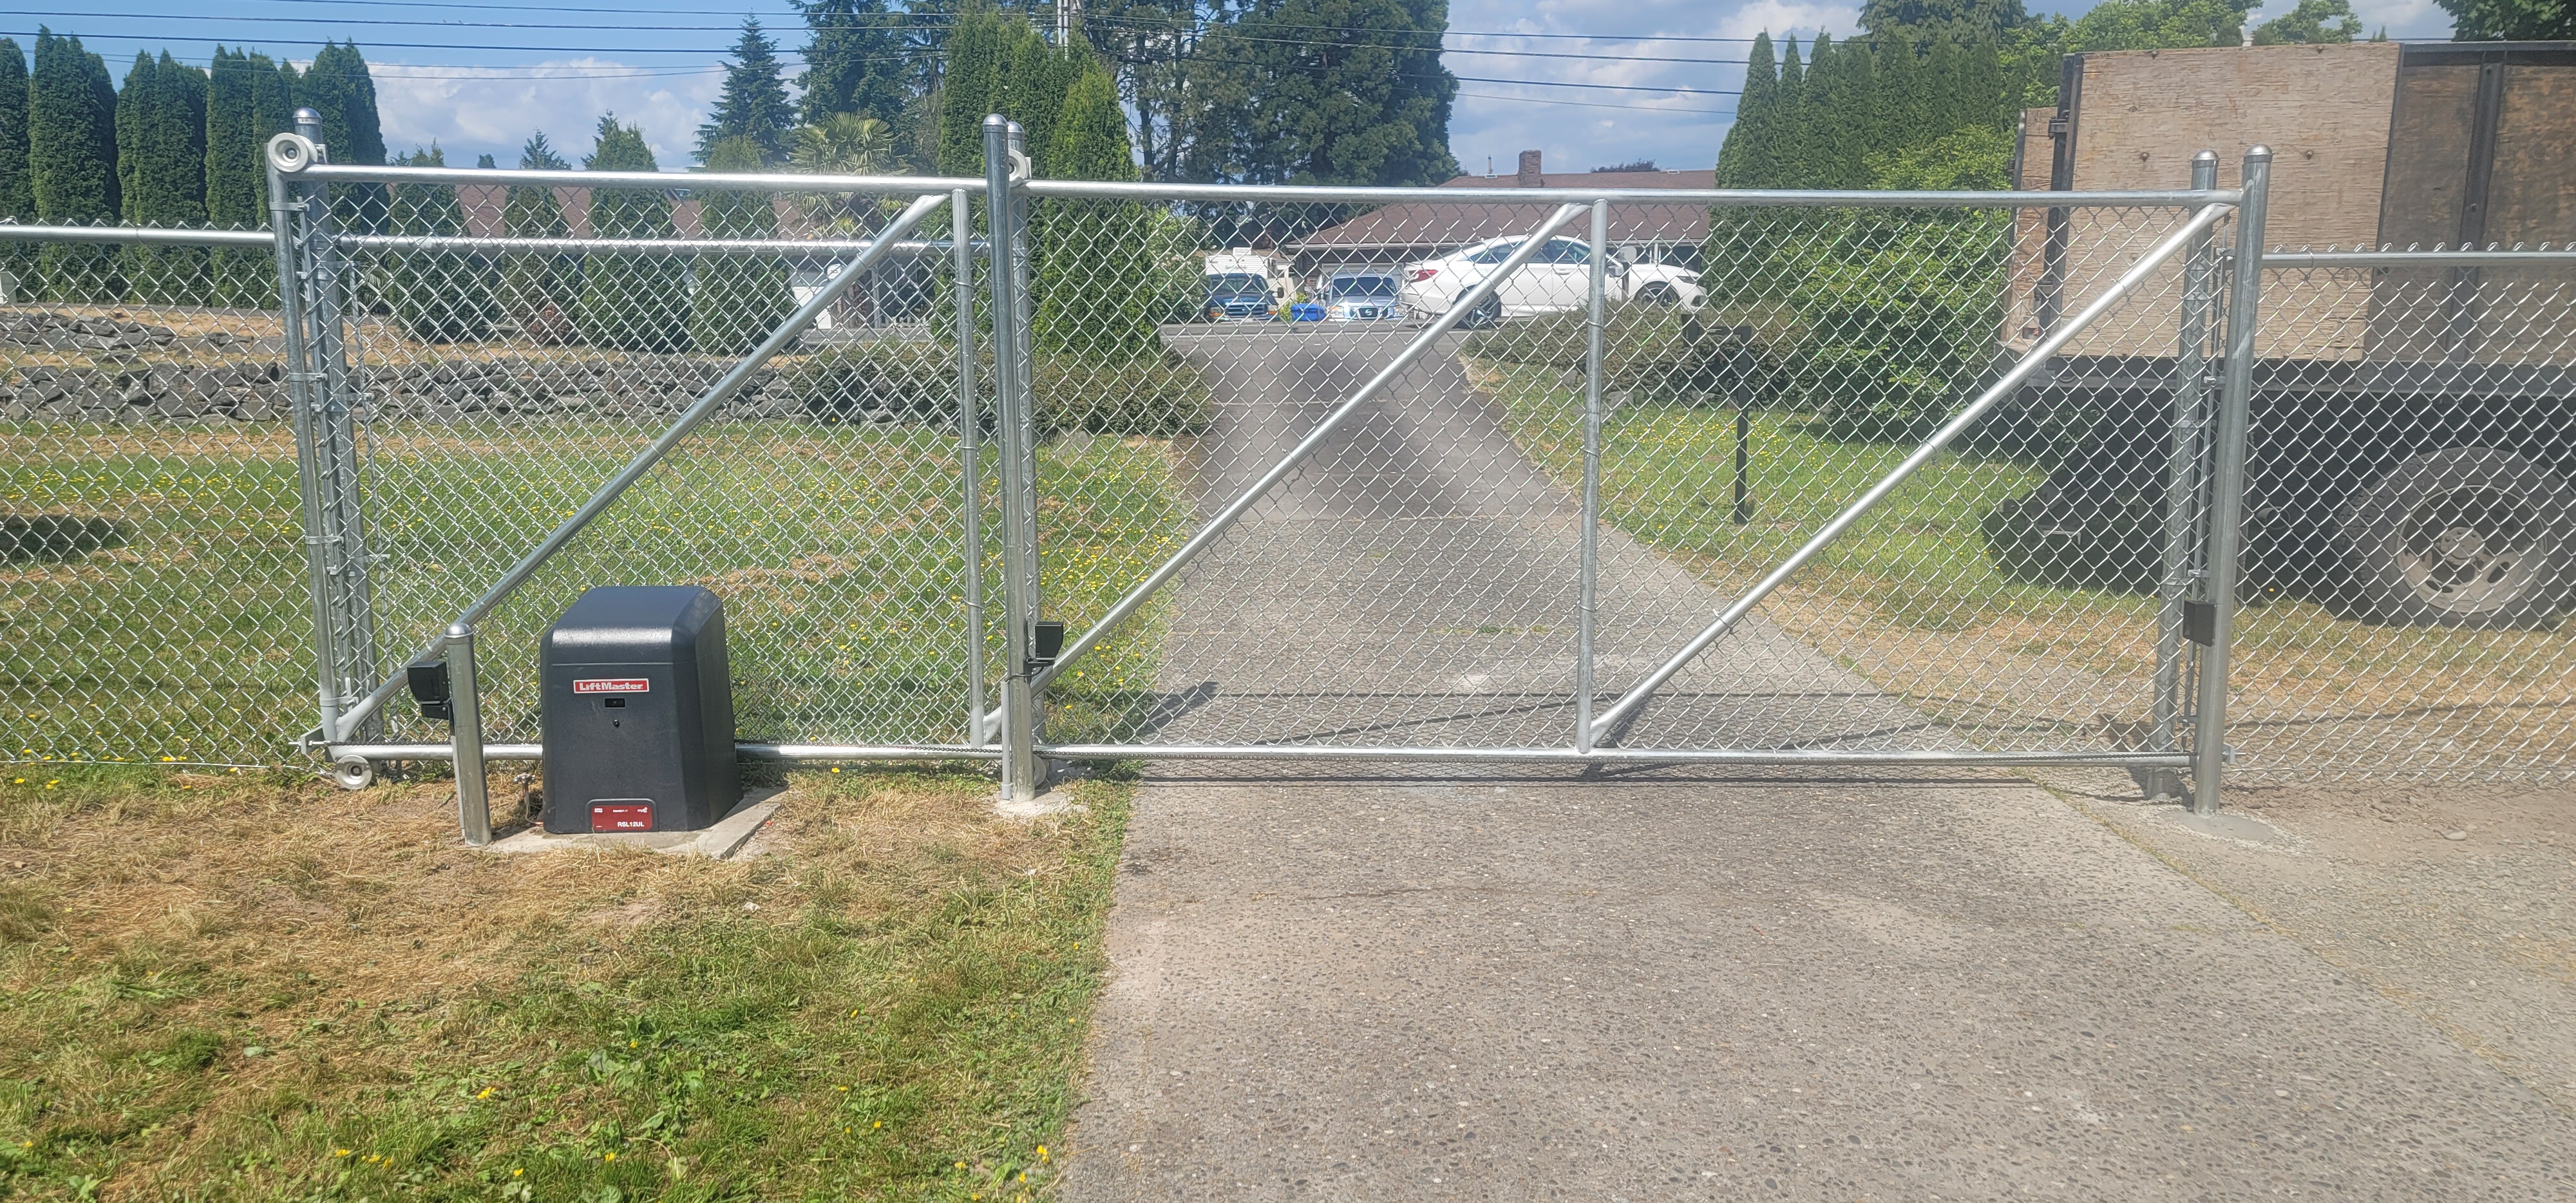 AUTOMATIC CHAIN LINK GATE